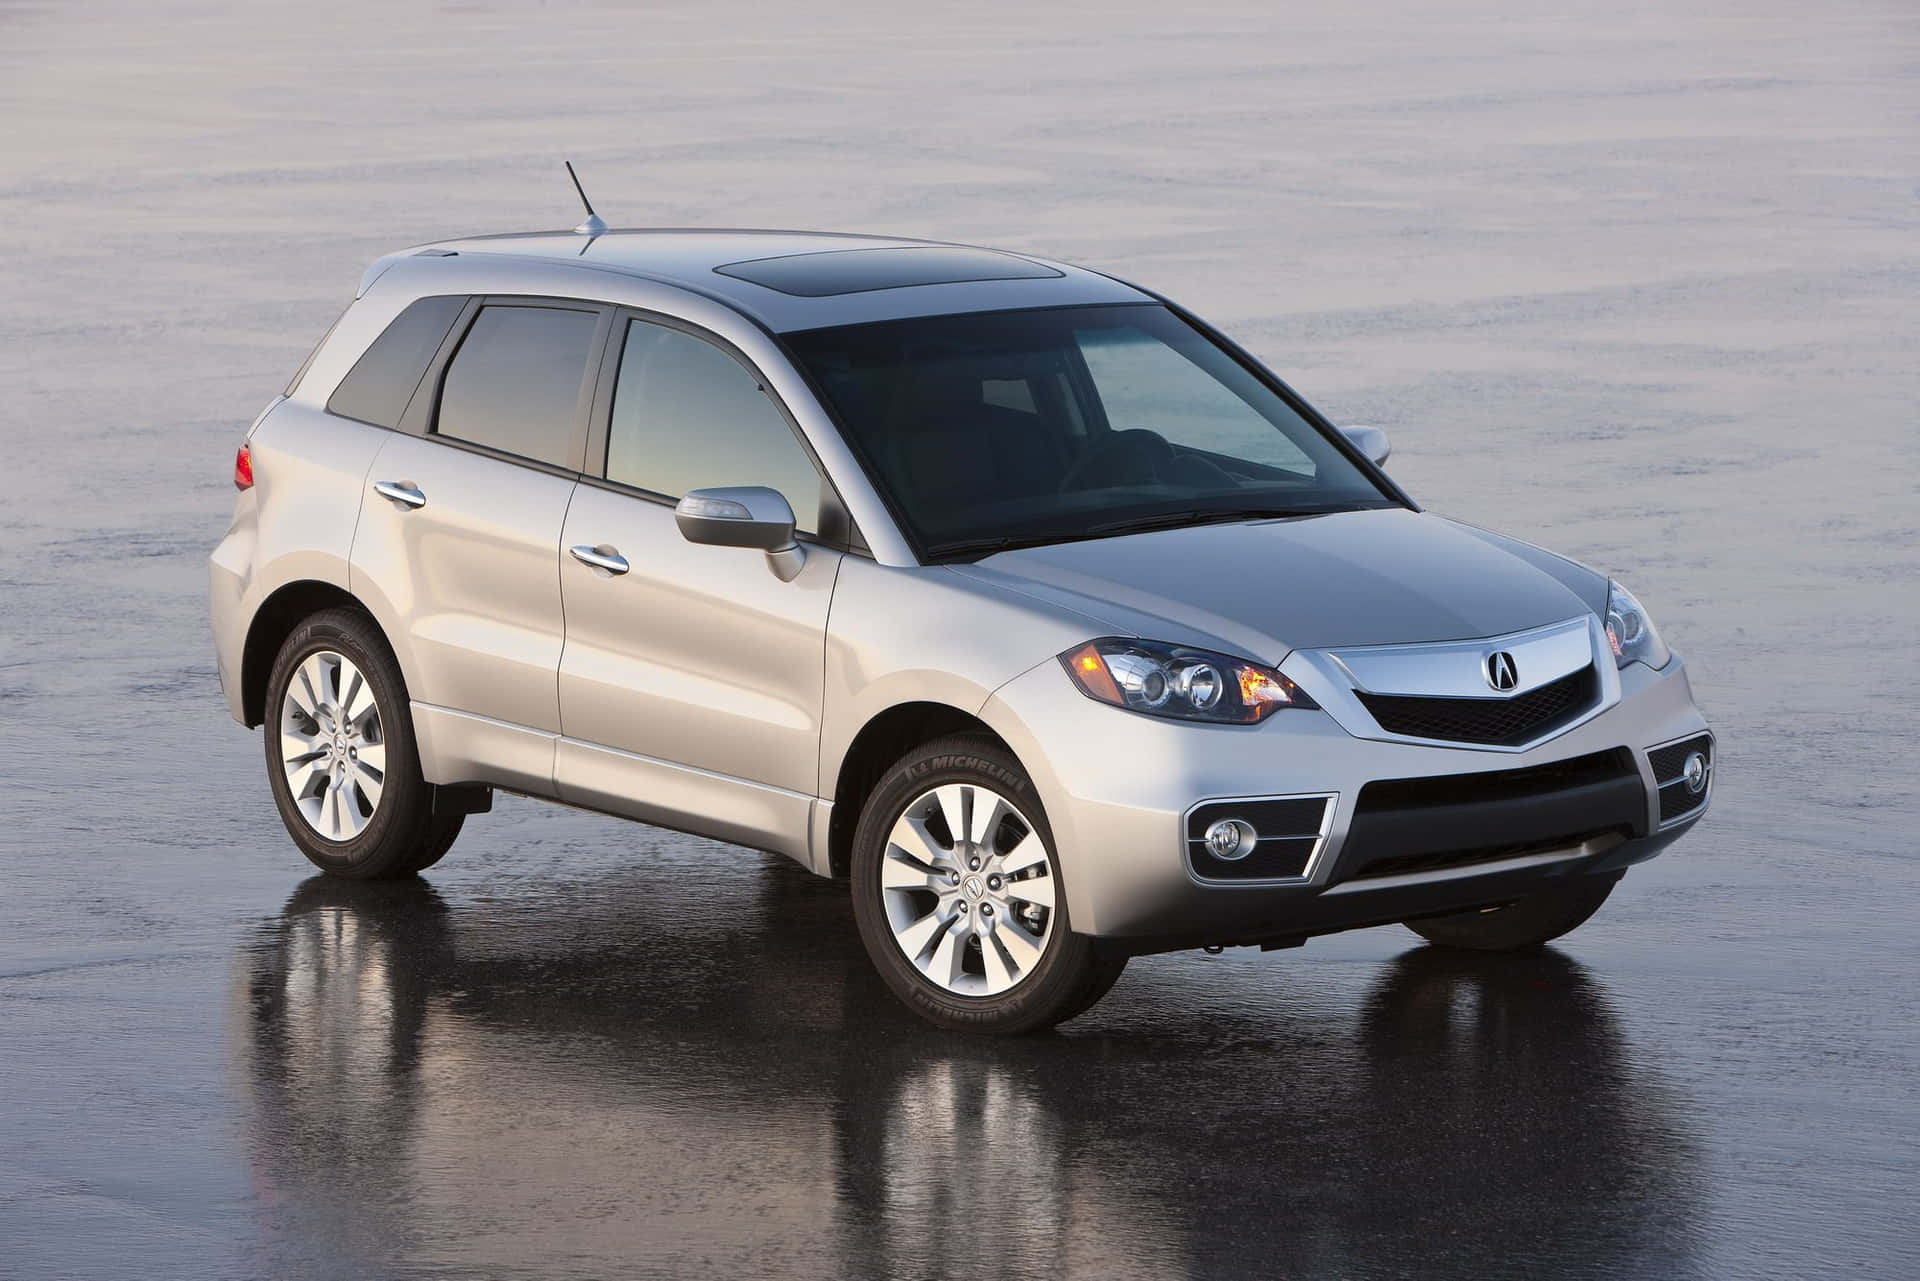 Acura RDX driving on a scenic highway Wallpaper